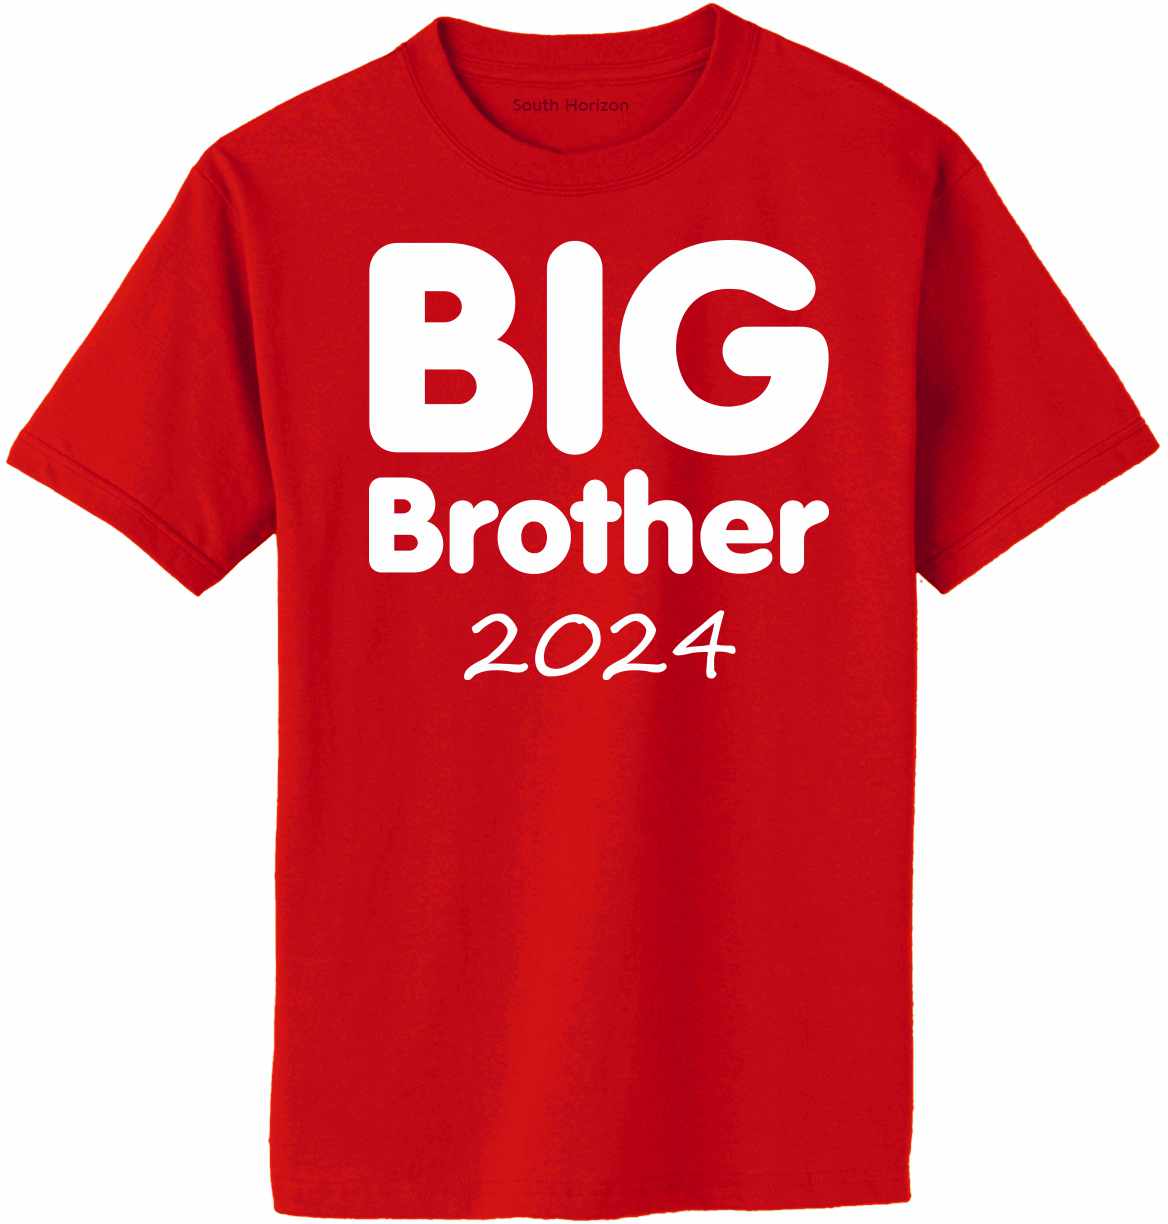 Big Brother 2024 on Adult T-Shirt